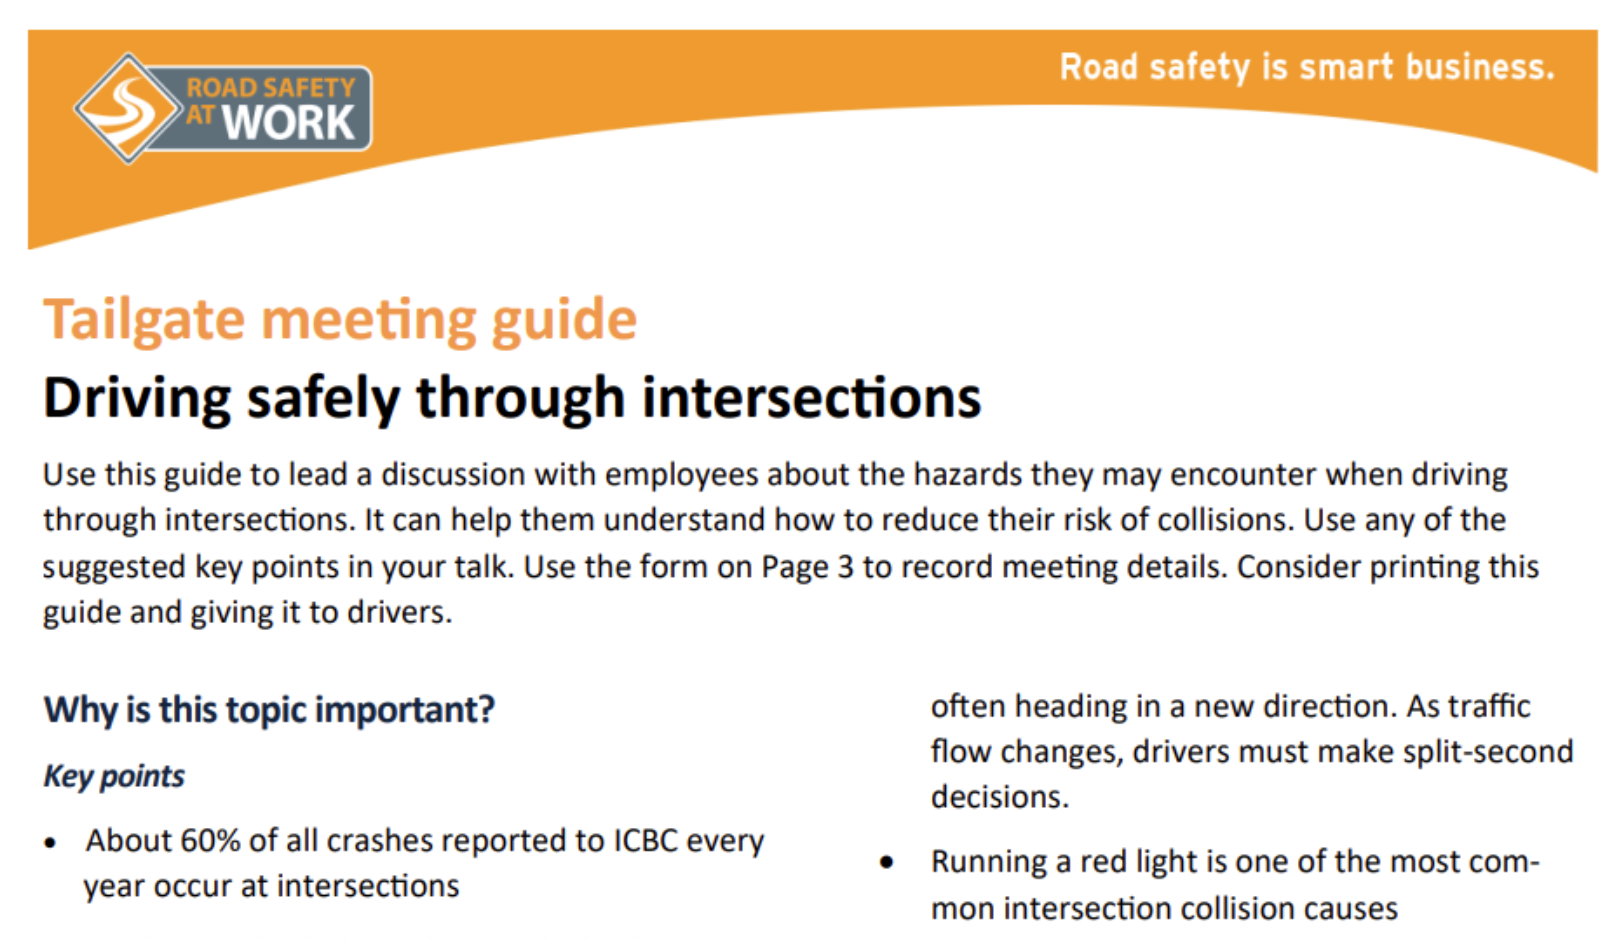 Tailgate meeting guide: Driving safely through intersections